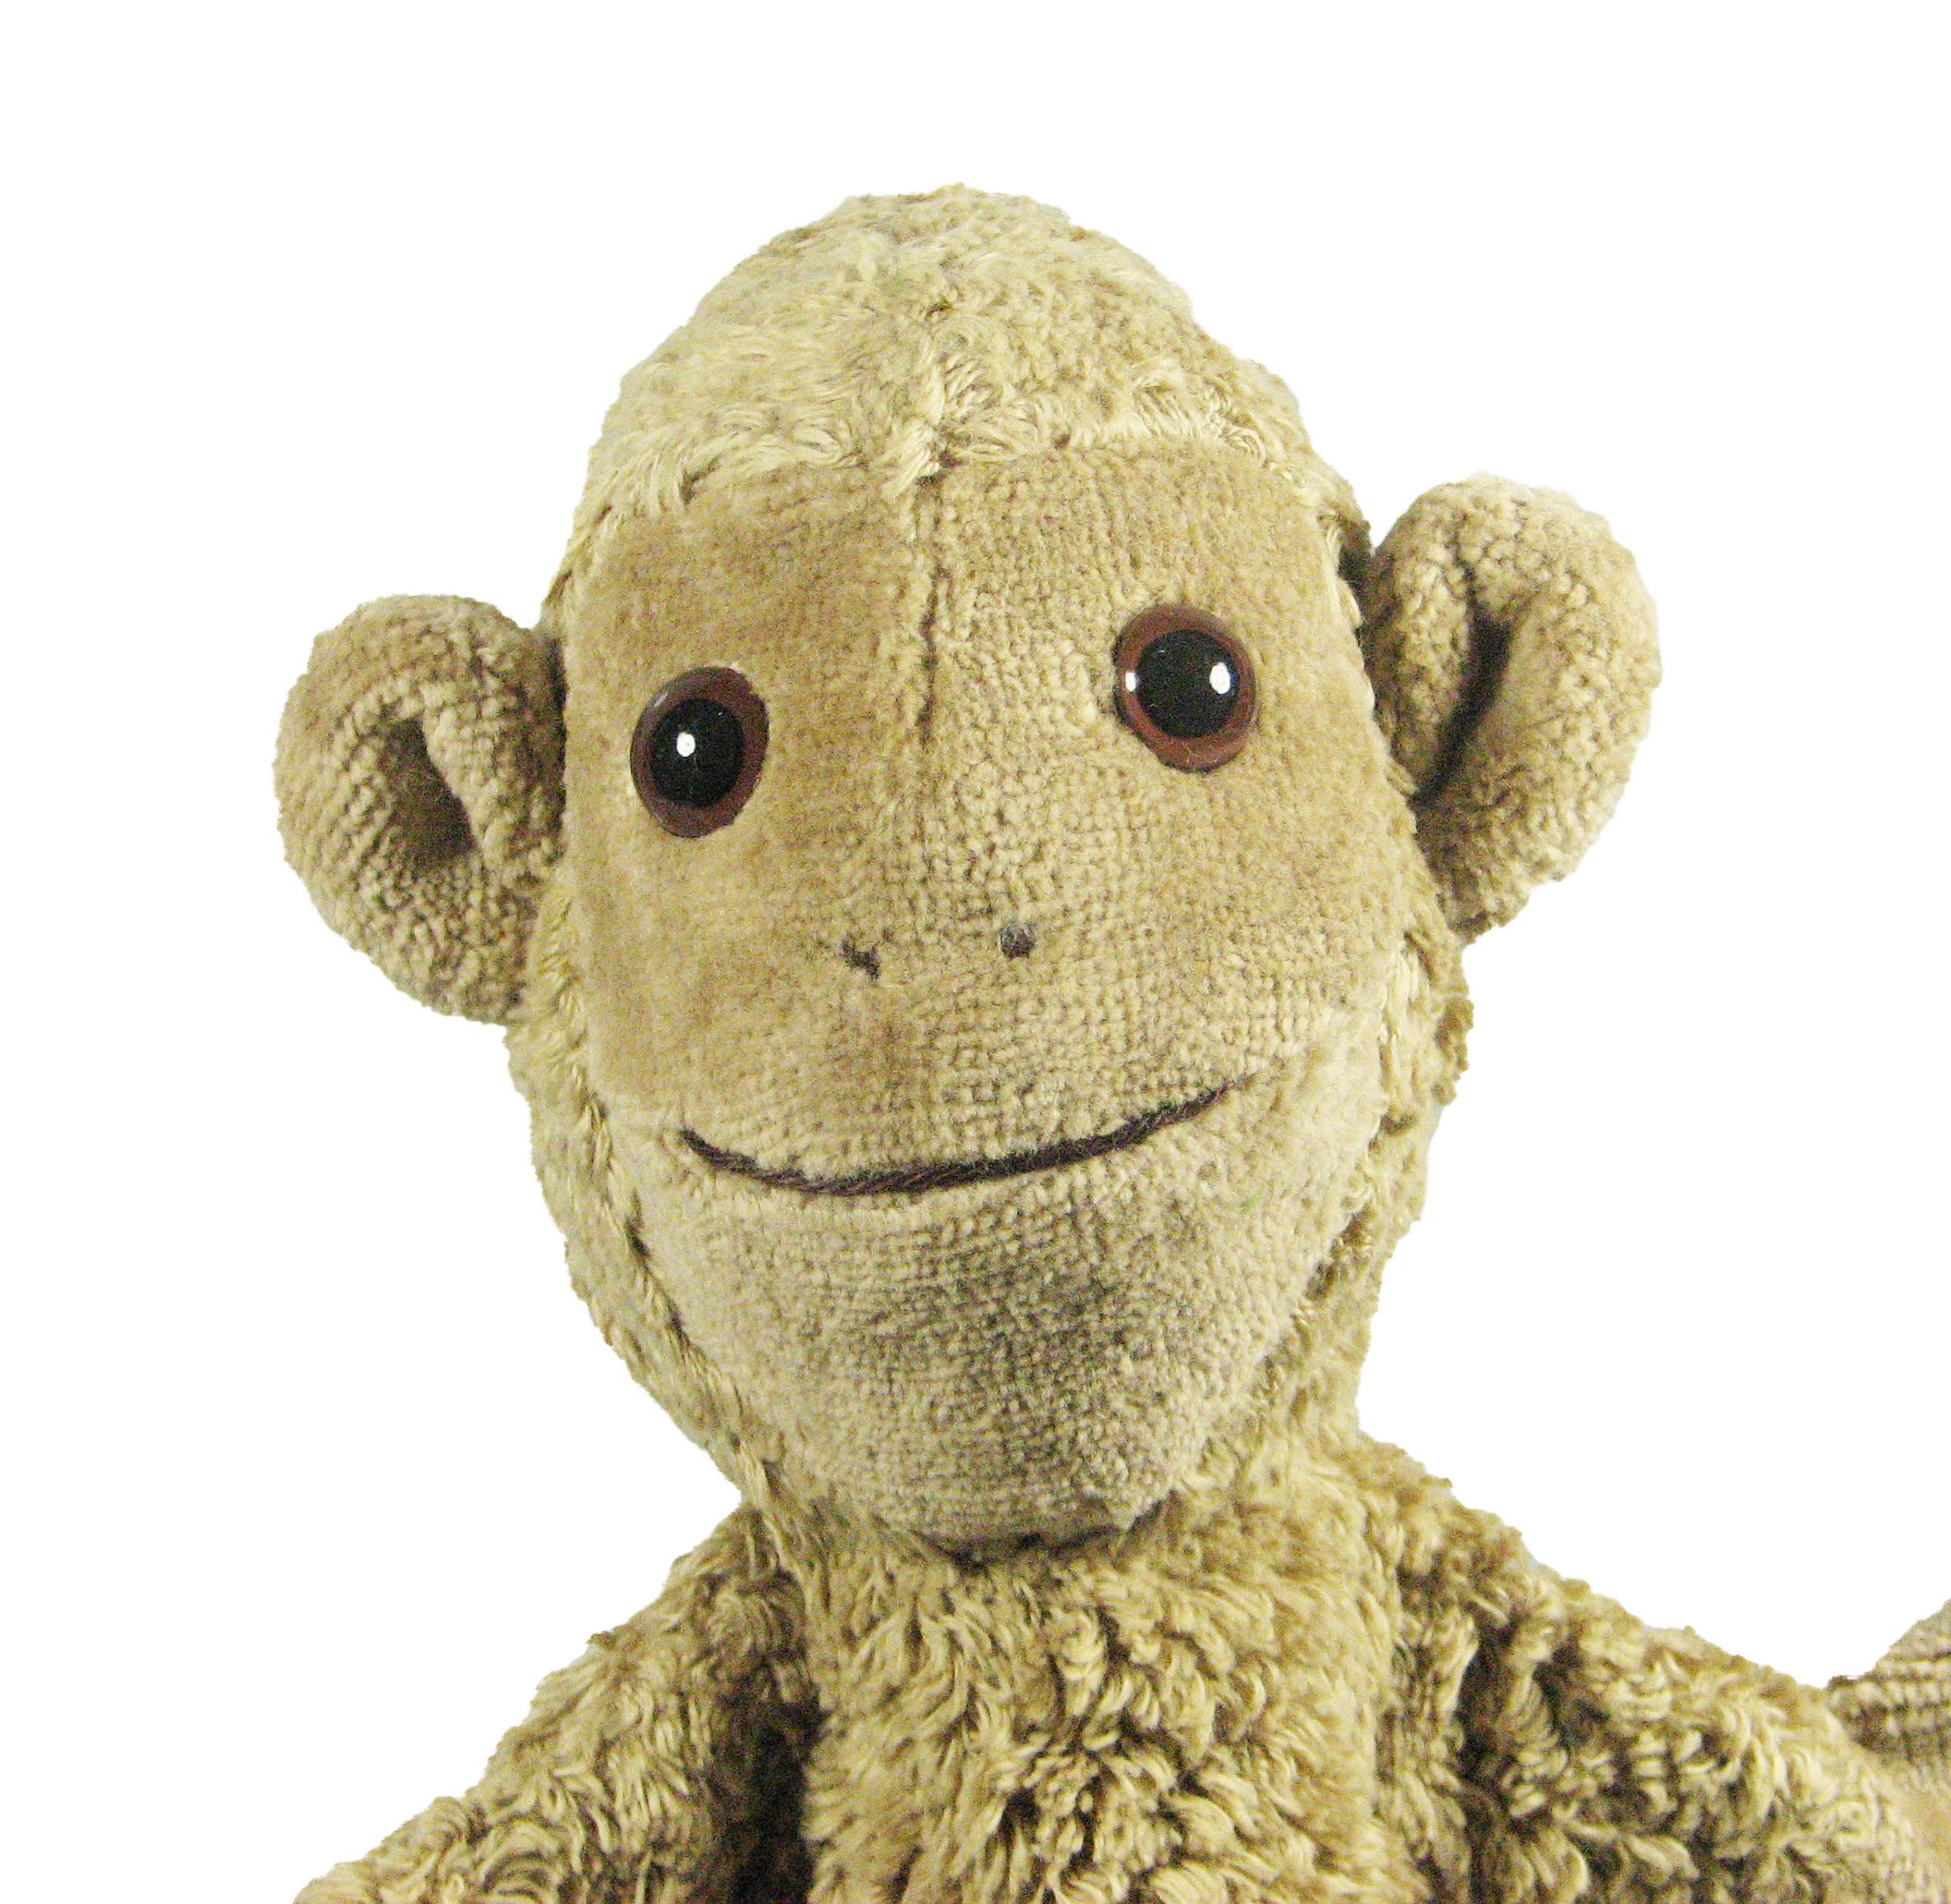 Hand puppet tan monkey - made of natural material - by Kallisto